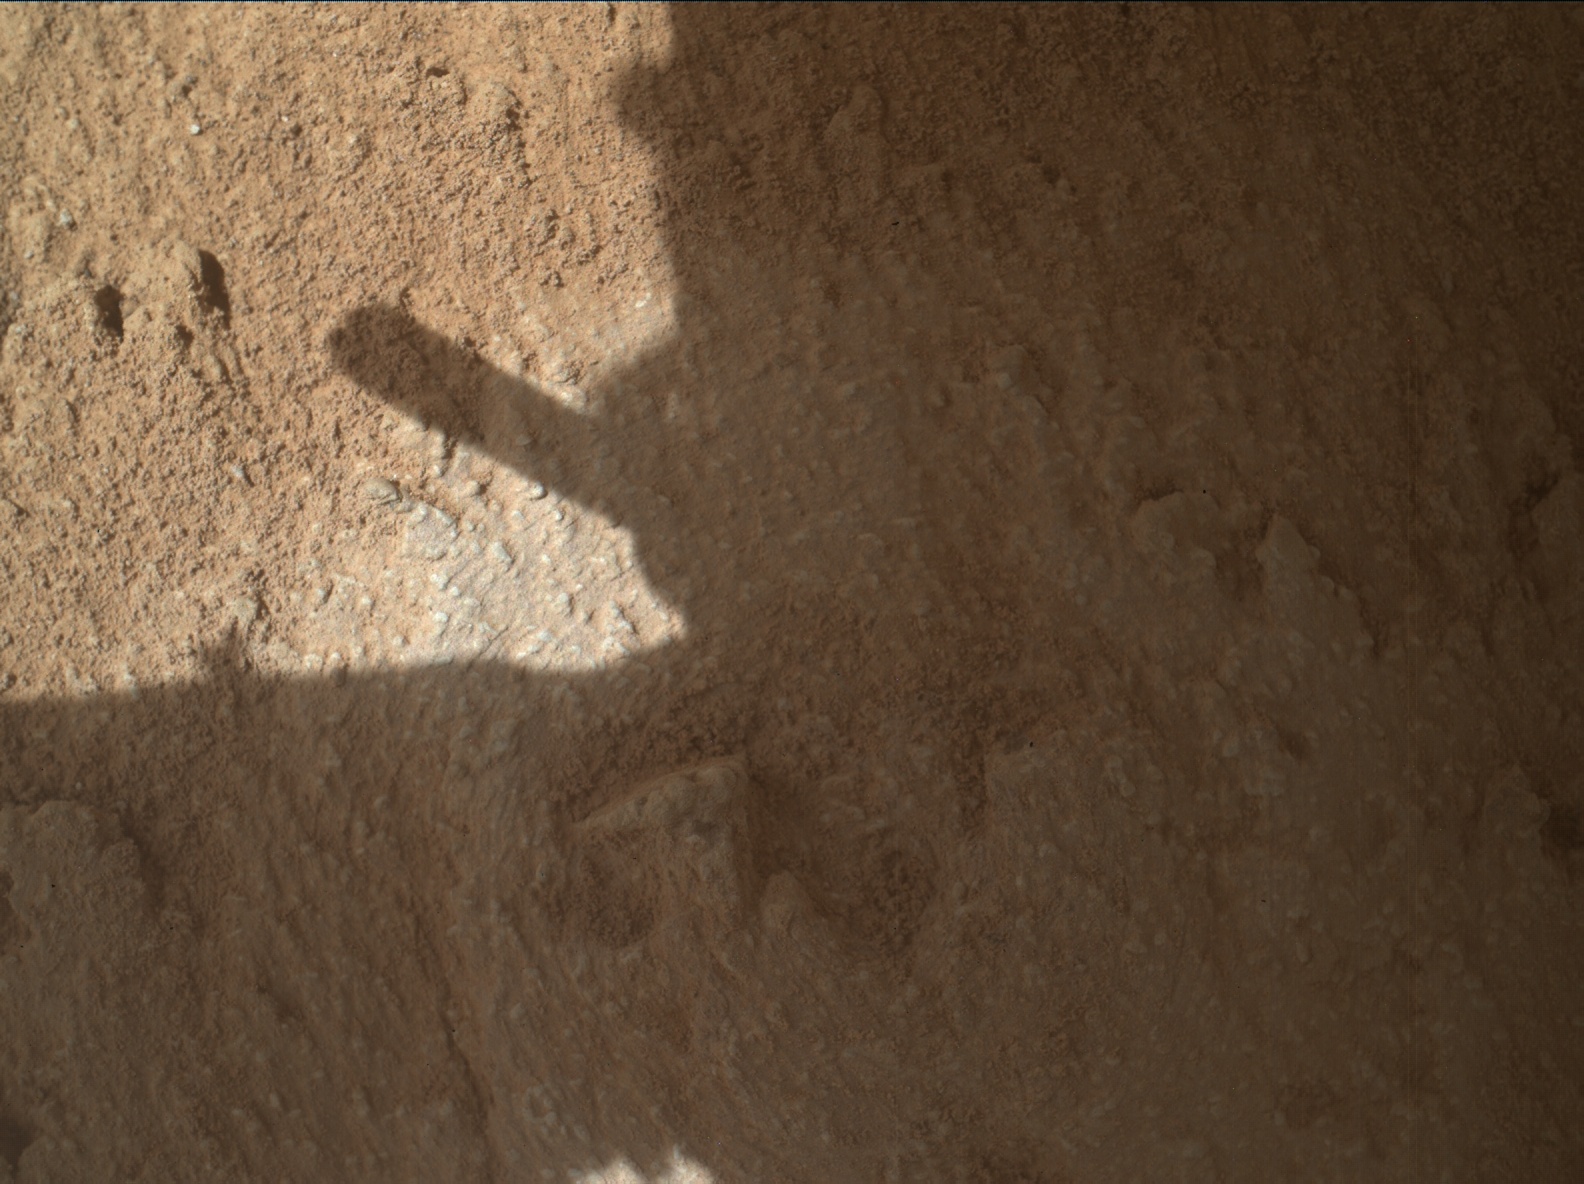 Nasa's Mars rover Curiosity acquired this image using its Mars Hand Lens Imager (MAHLI) on Sol 3845